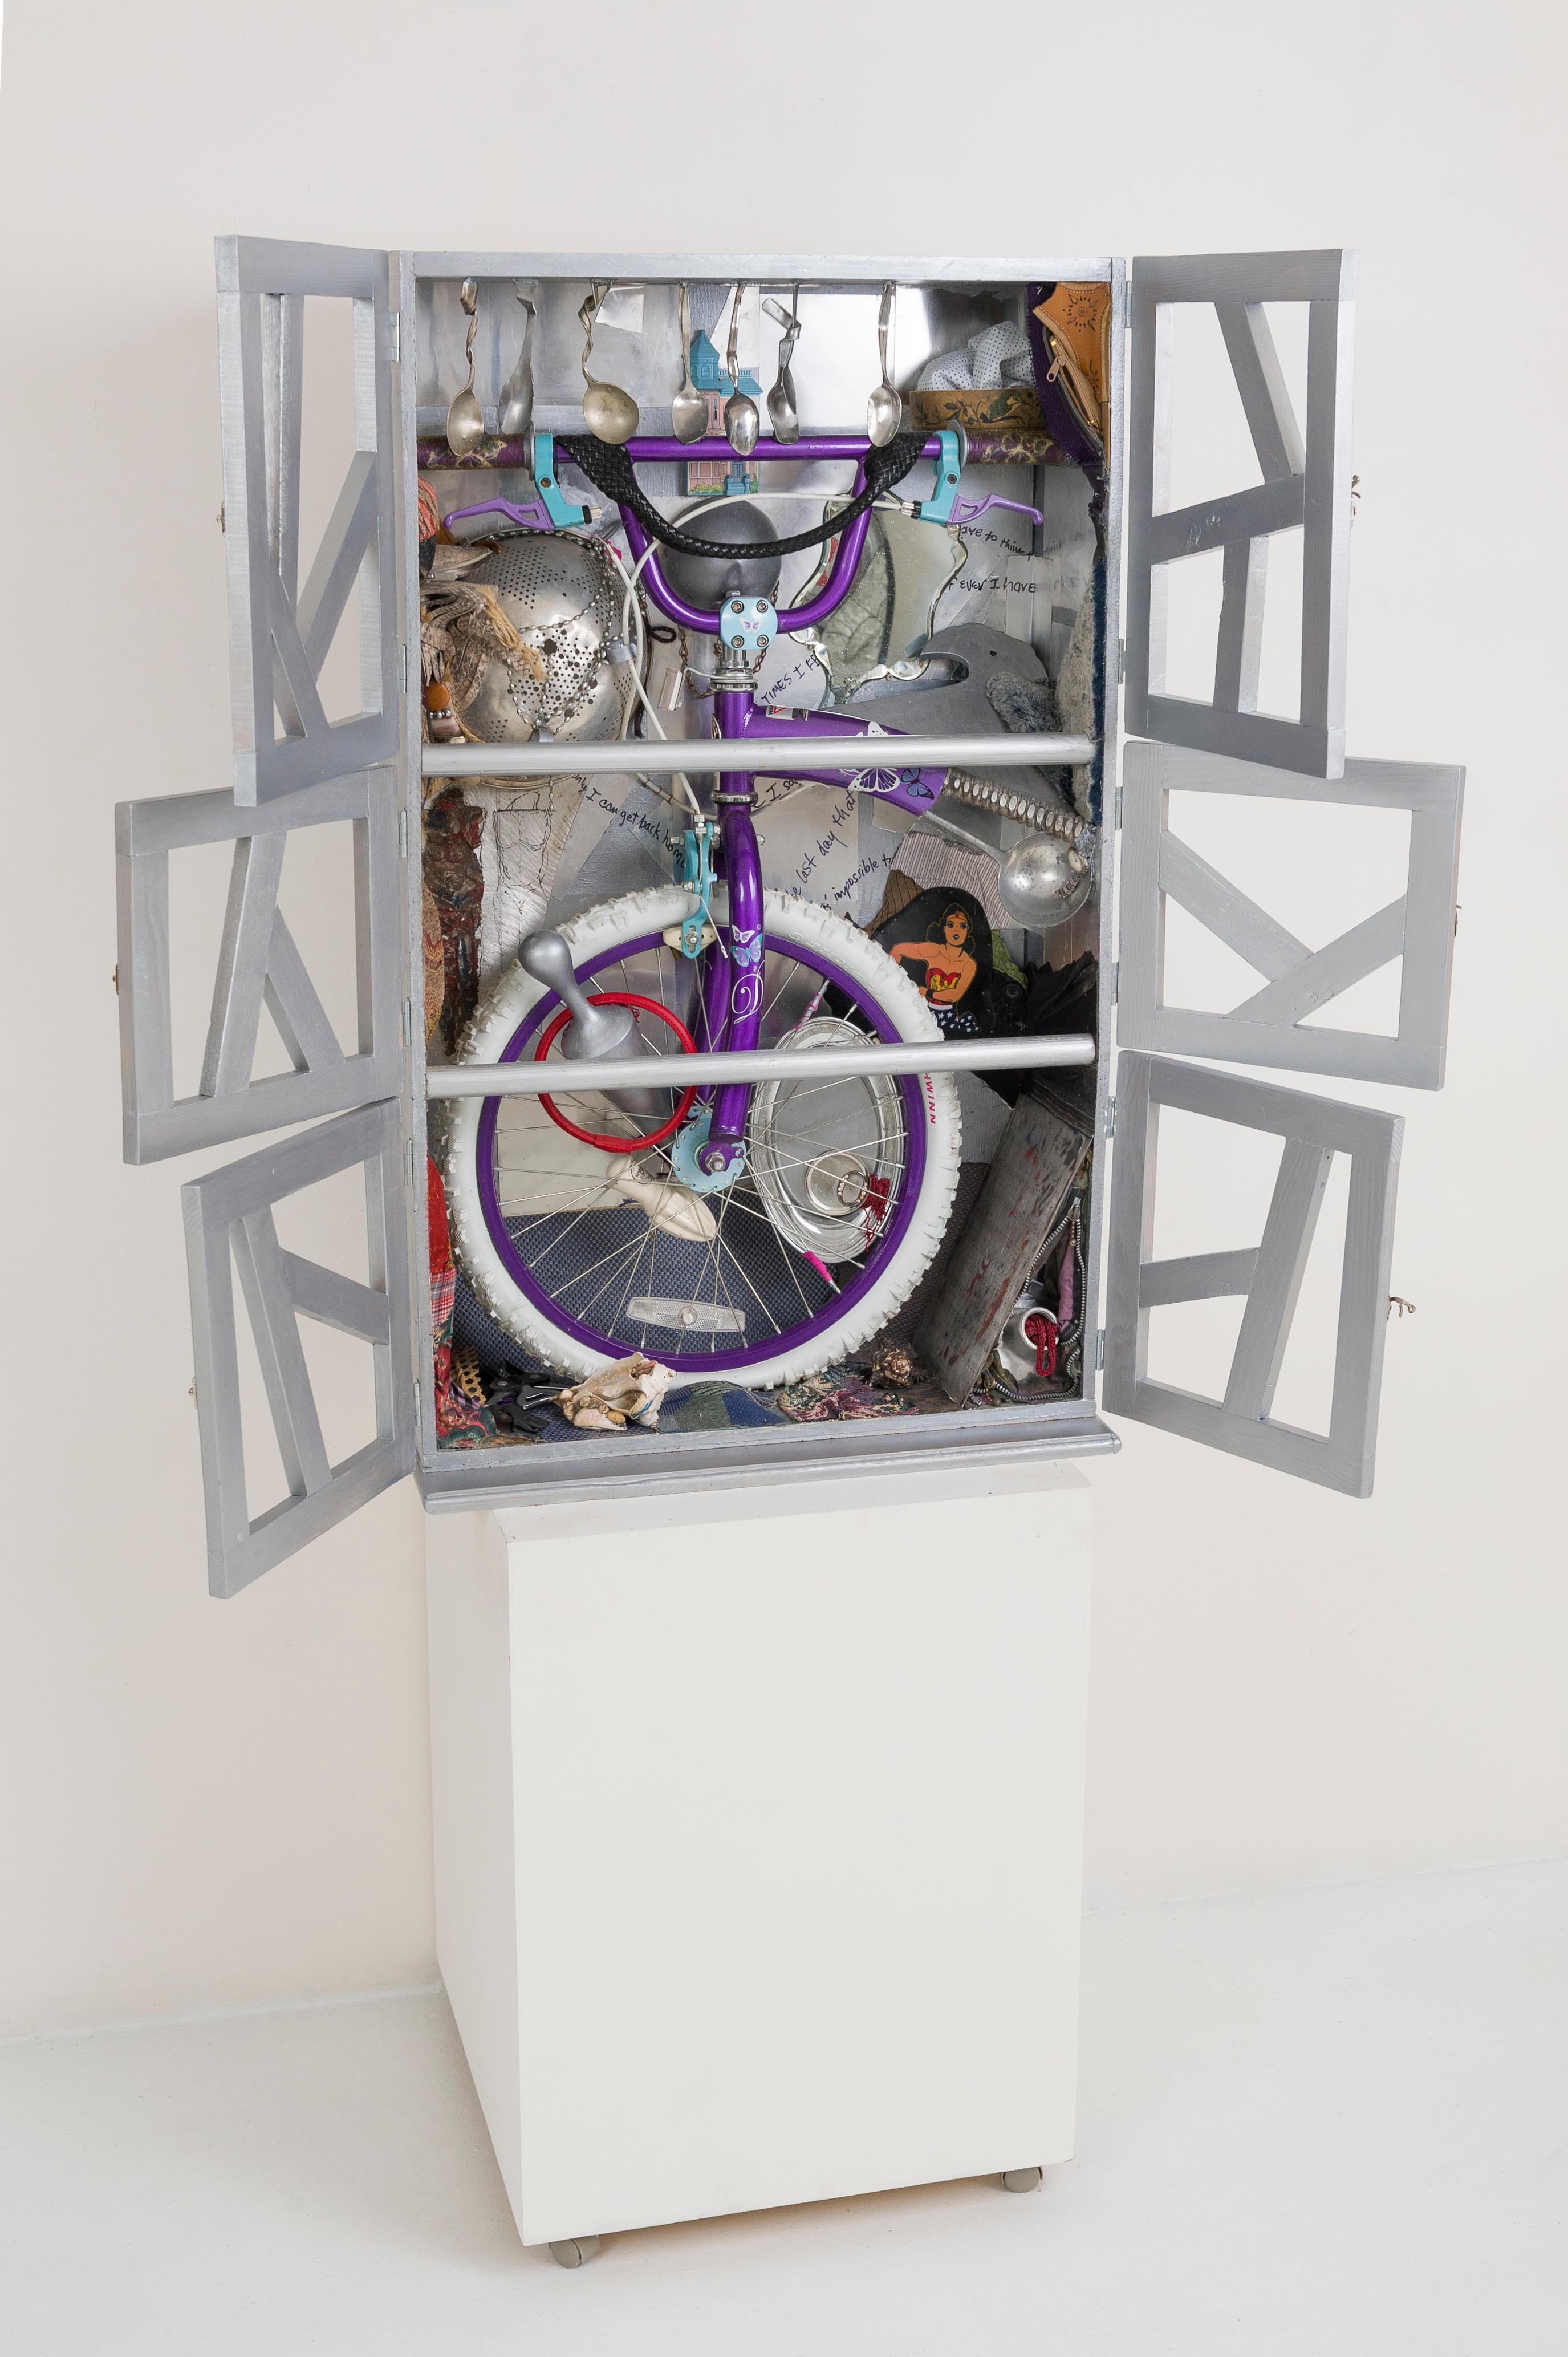 Closet with Bicycle 890 - Cabinet of Curiosities, Wunderkammer Art Sculpture